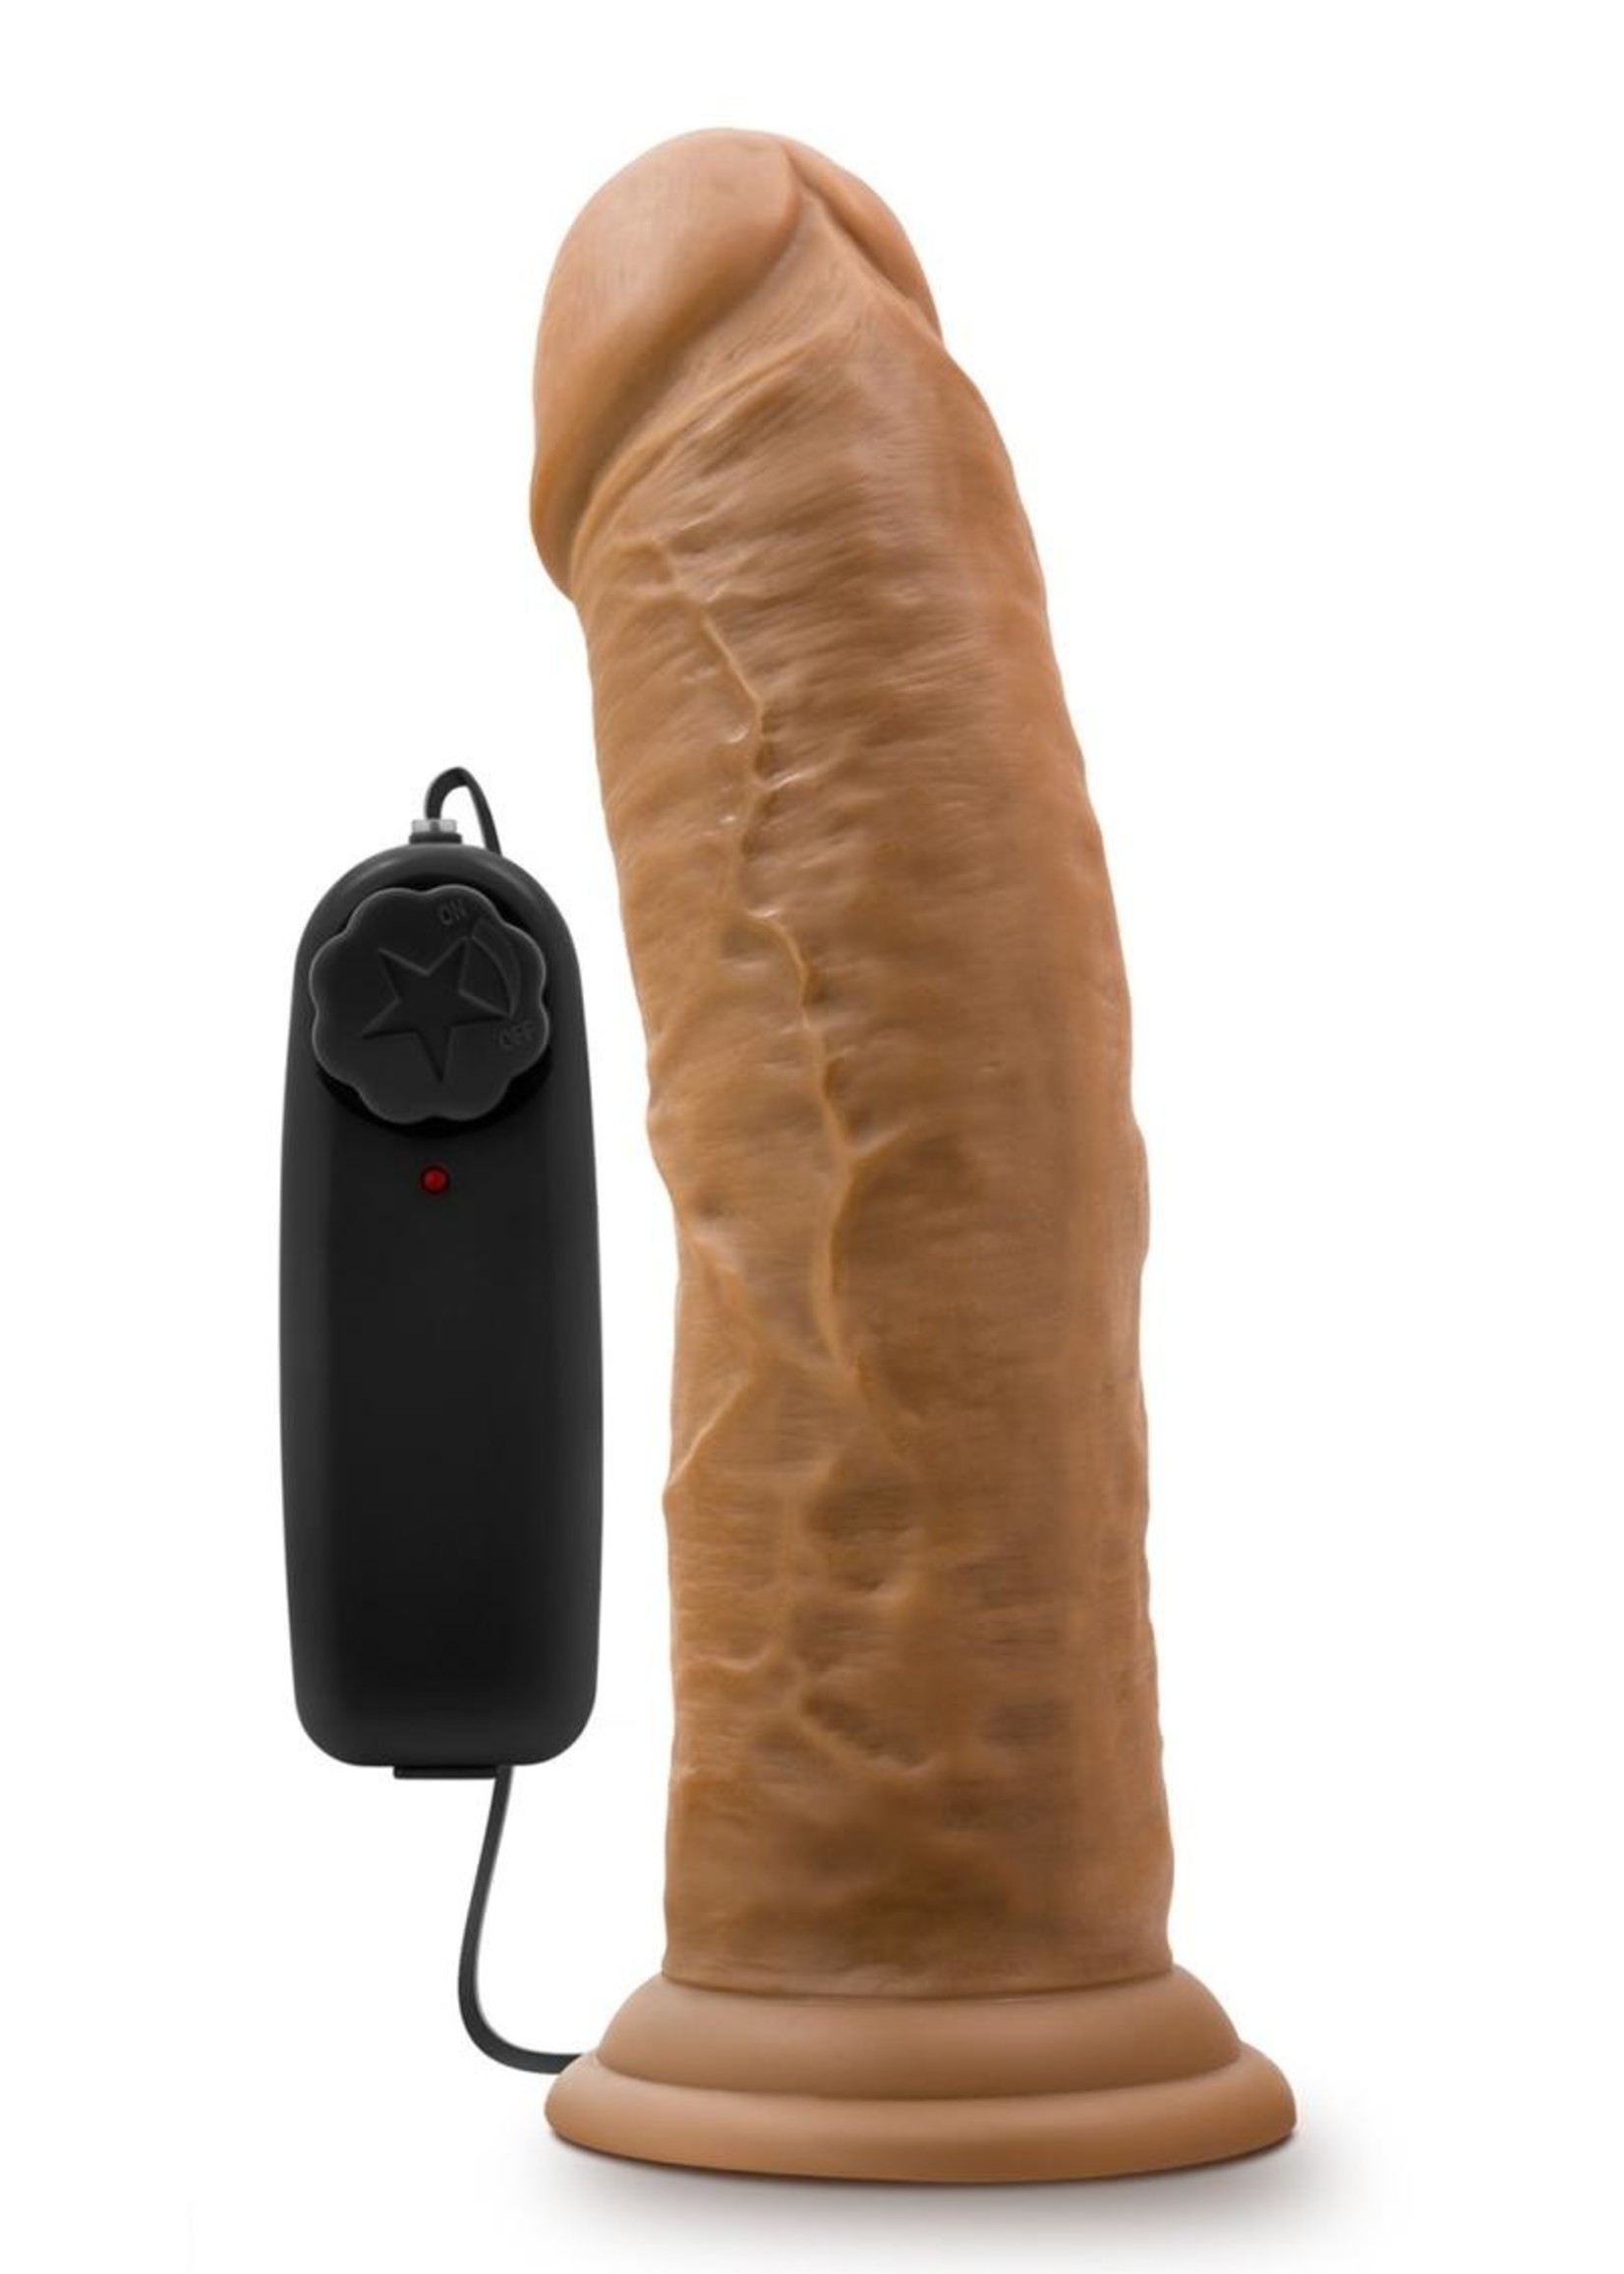 Dr. Skin Dr. Joe Vibrating Dildo with Remote Control 8in in Caramel